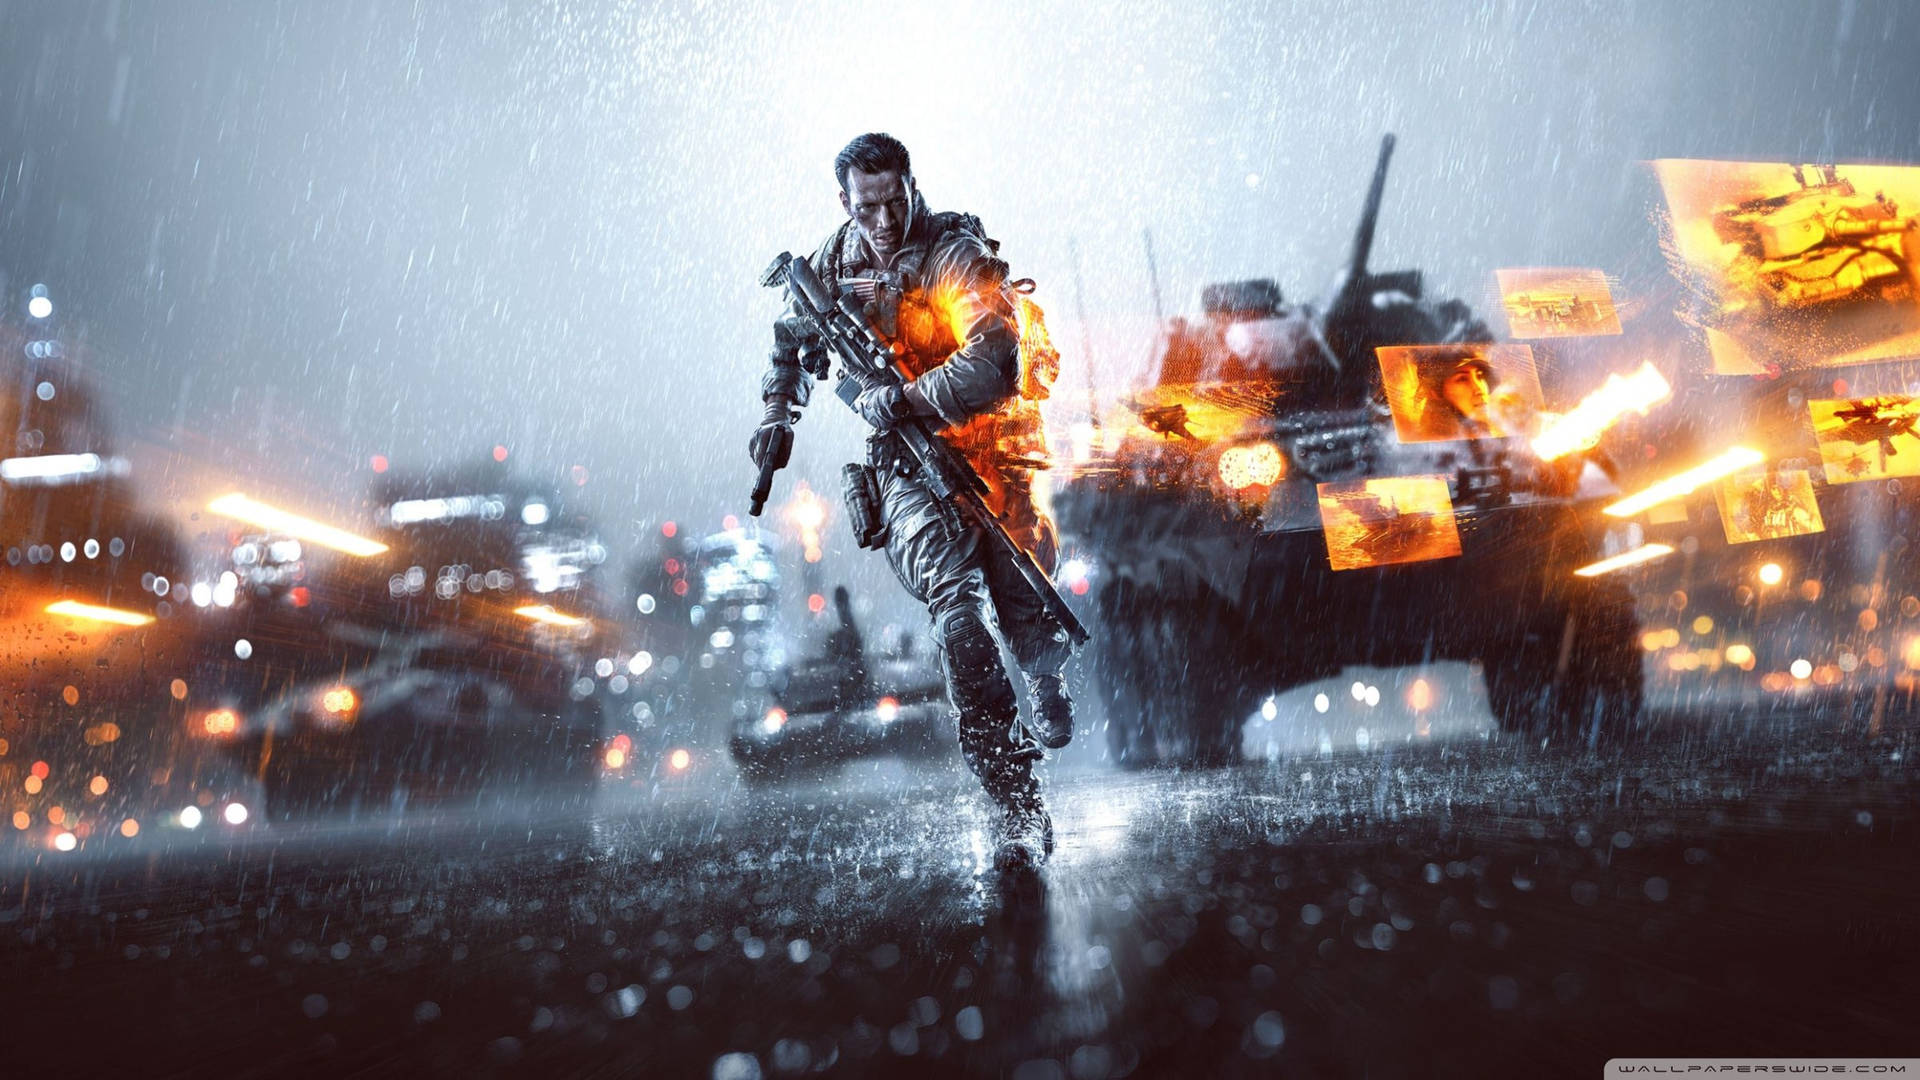 Dynamic And Tense Atmosphere In The Battlefield 3 Battleground Hd